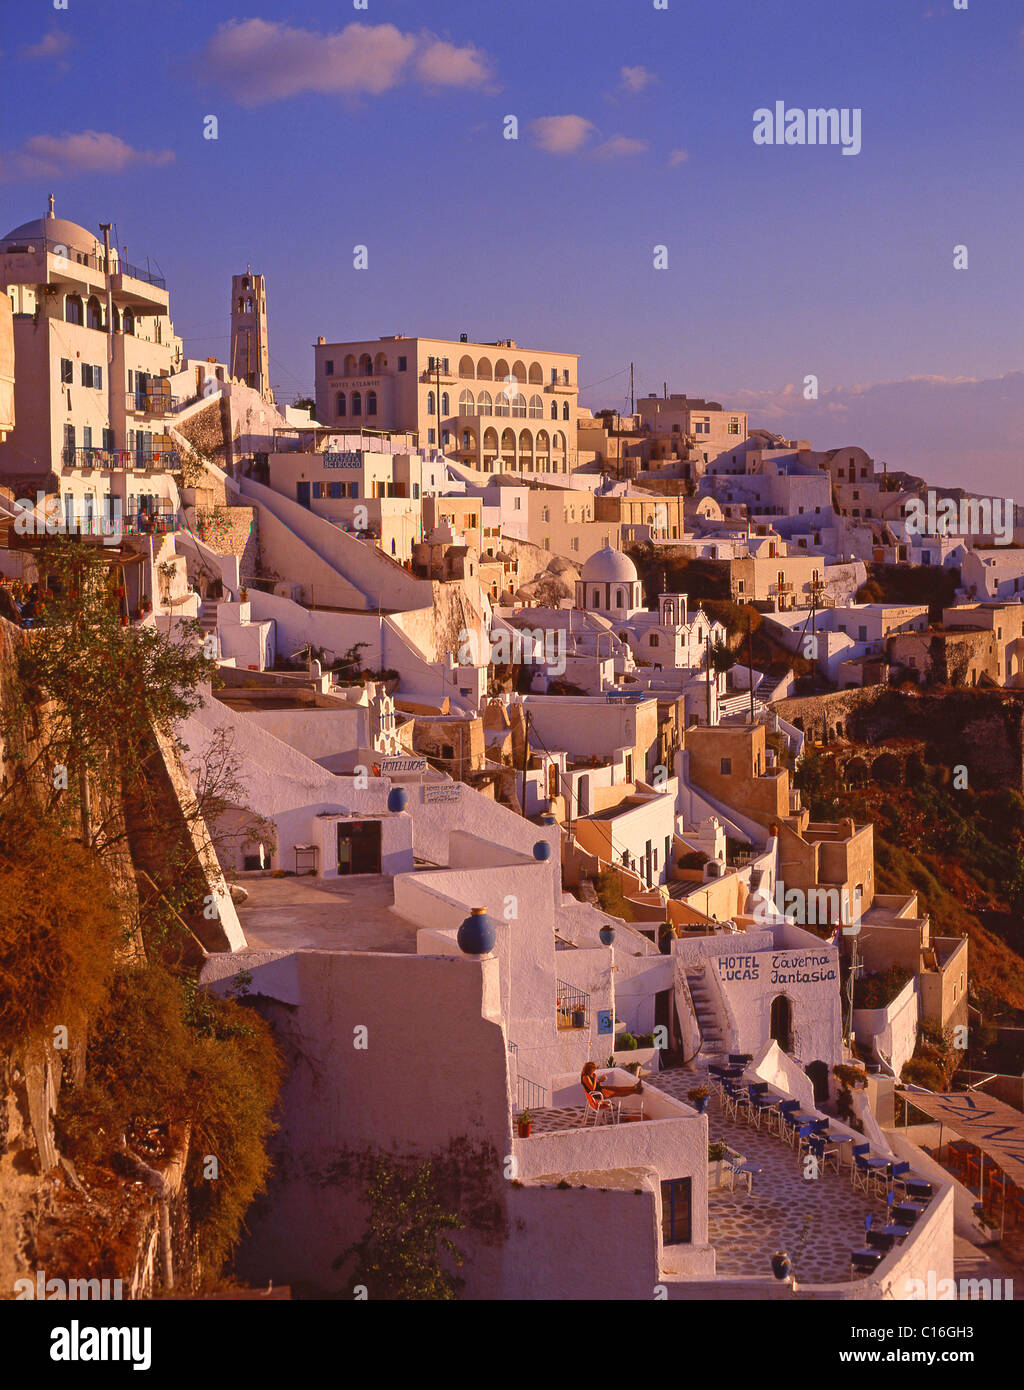 View of town at sunset, Fira, Santorini, The Cyclades, South Aegean, Greece Stock Photo